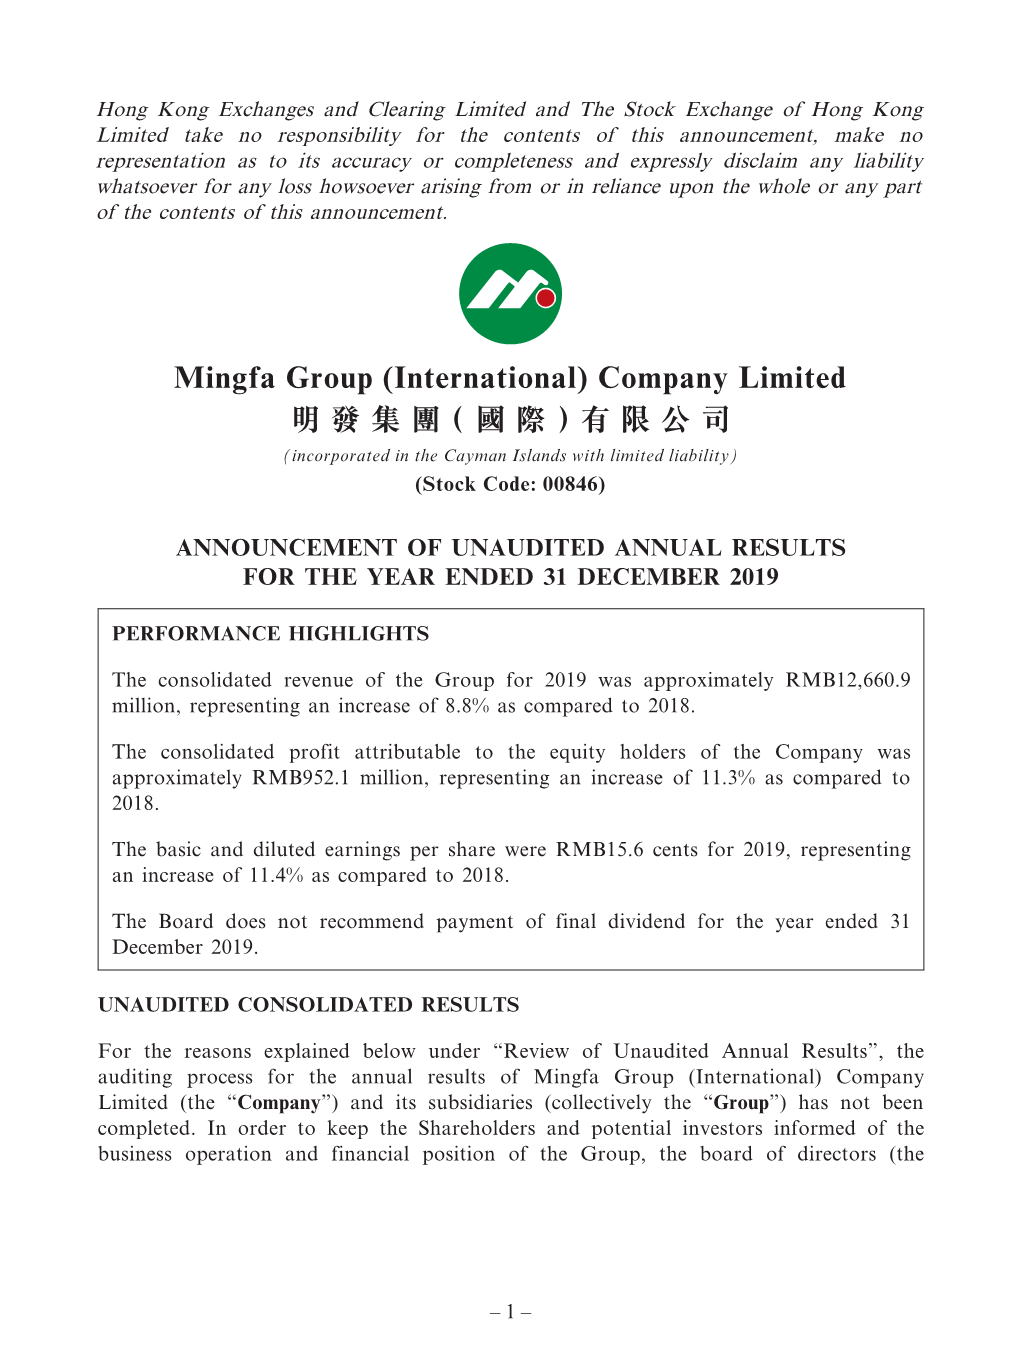 Mingfa Group (International) Company Limited 明發集團（國際）有限公司 (Incorporated in the Cayman Islands with Limited Liability) (Stock Code: 00846)